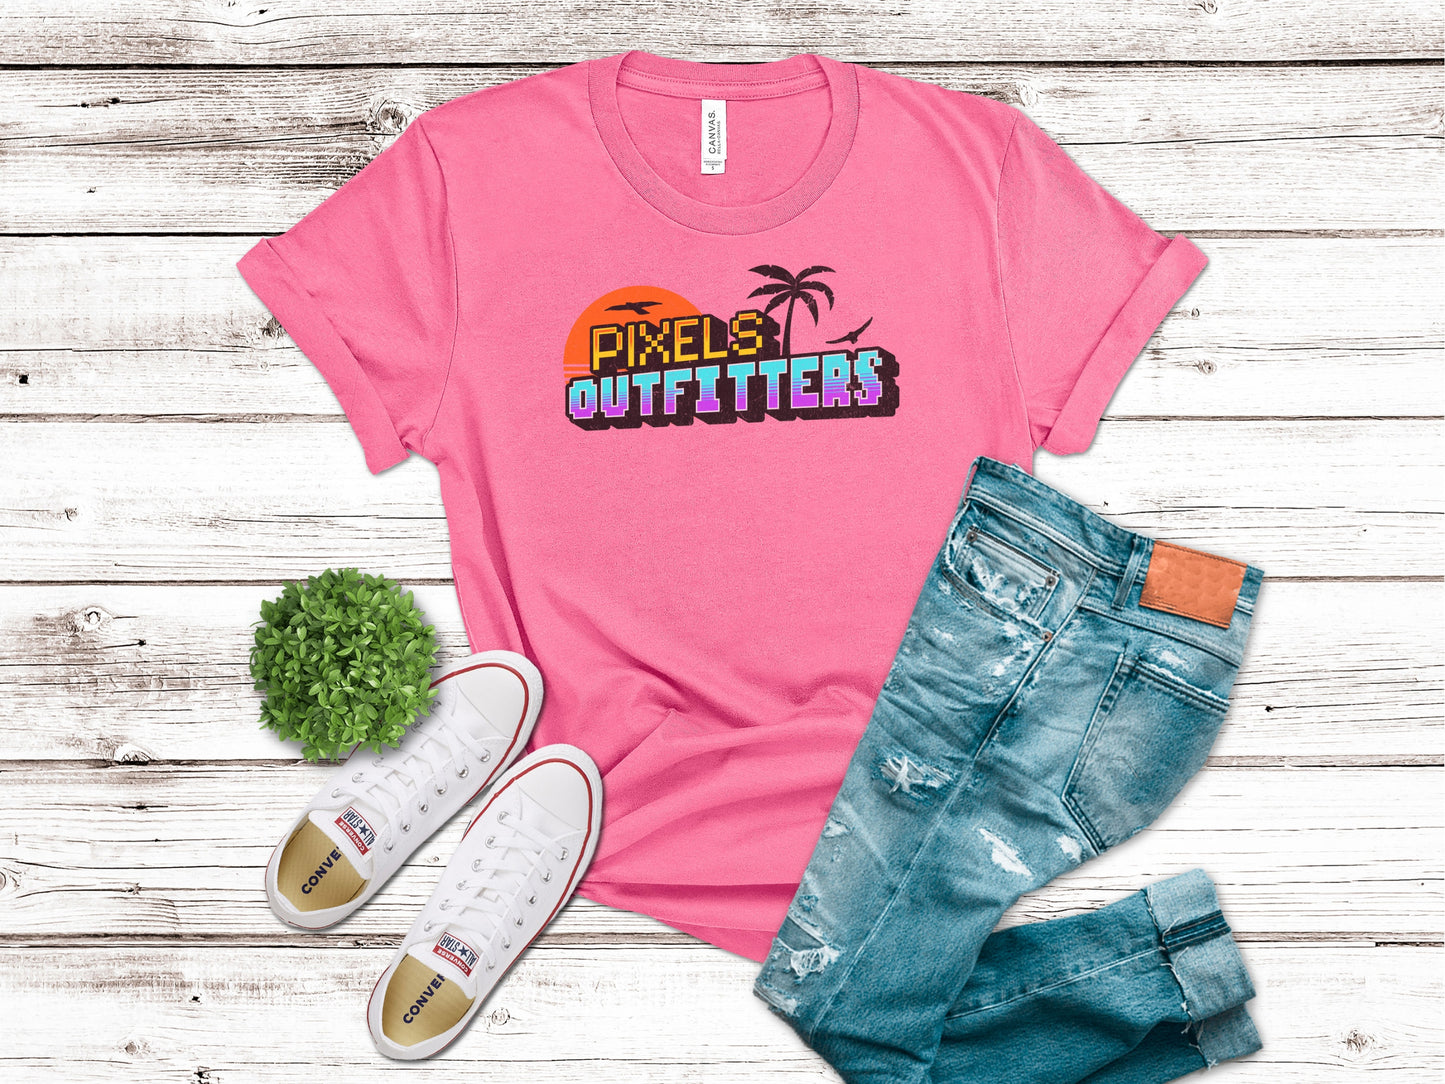 PIXELS OUTFITTERS PALM TREES